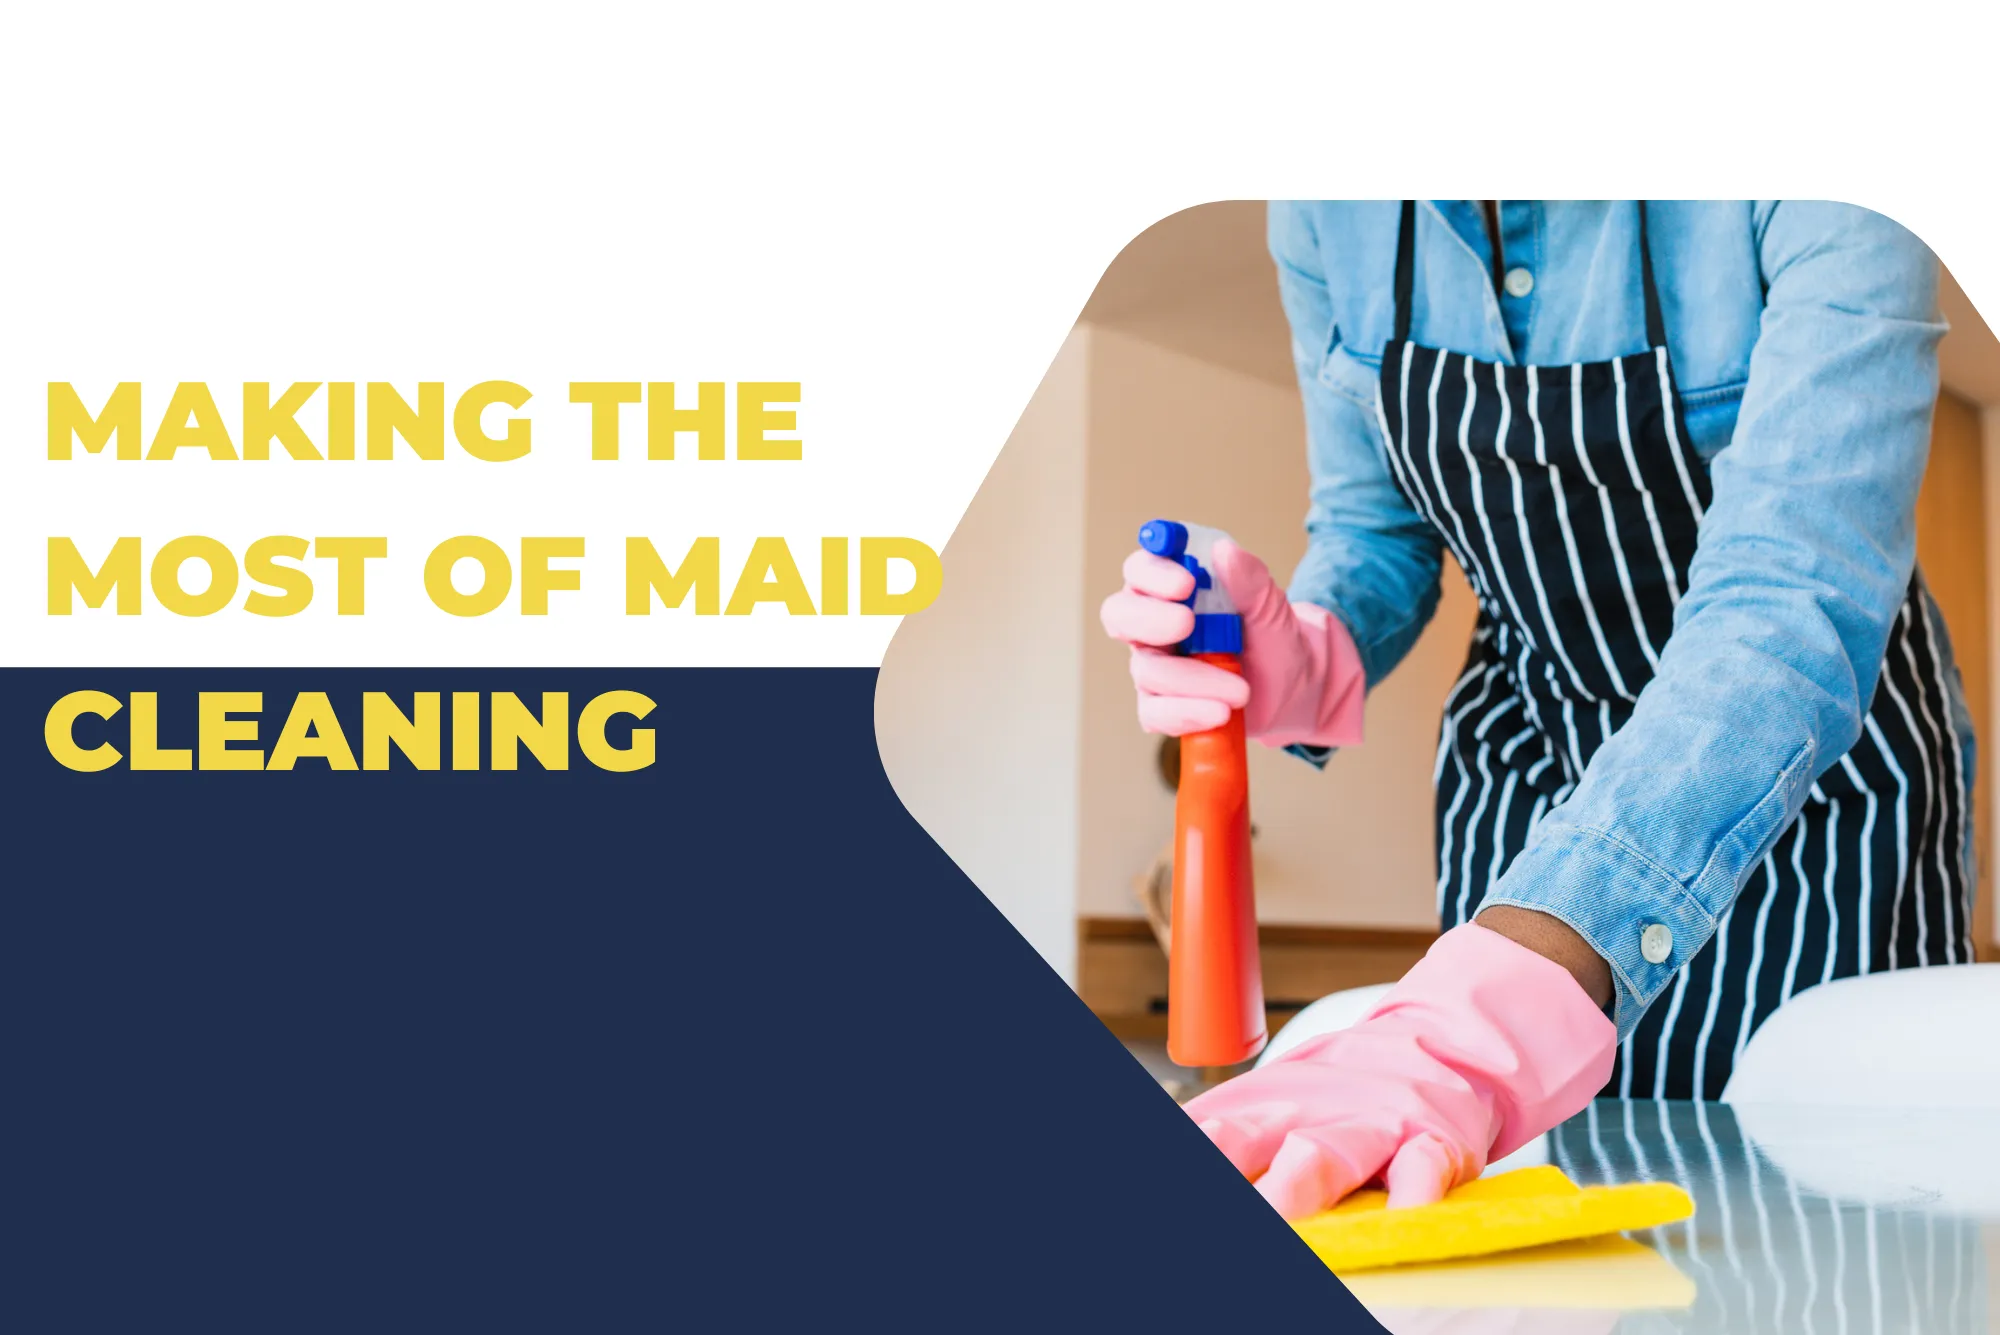 Making the Most of Maid Cleaning: Tips to Maximize Your Cleaning Day